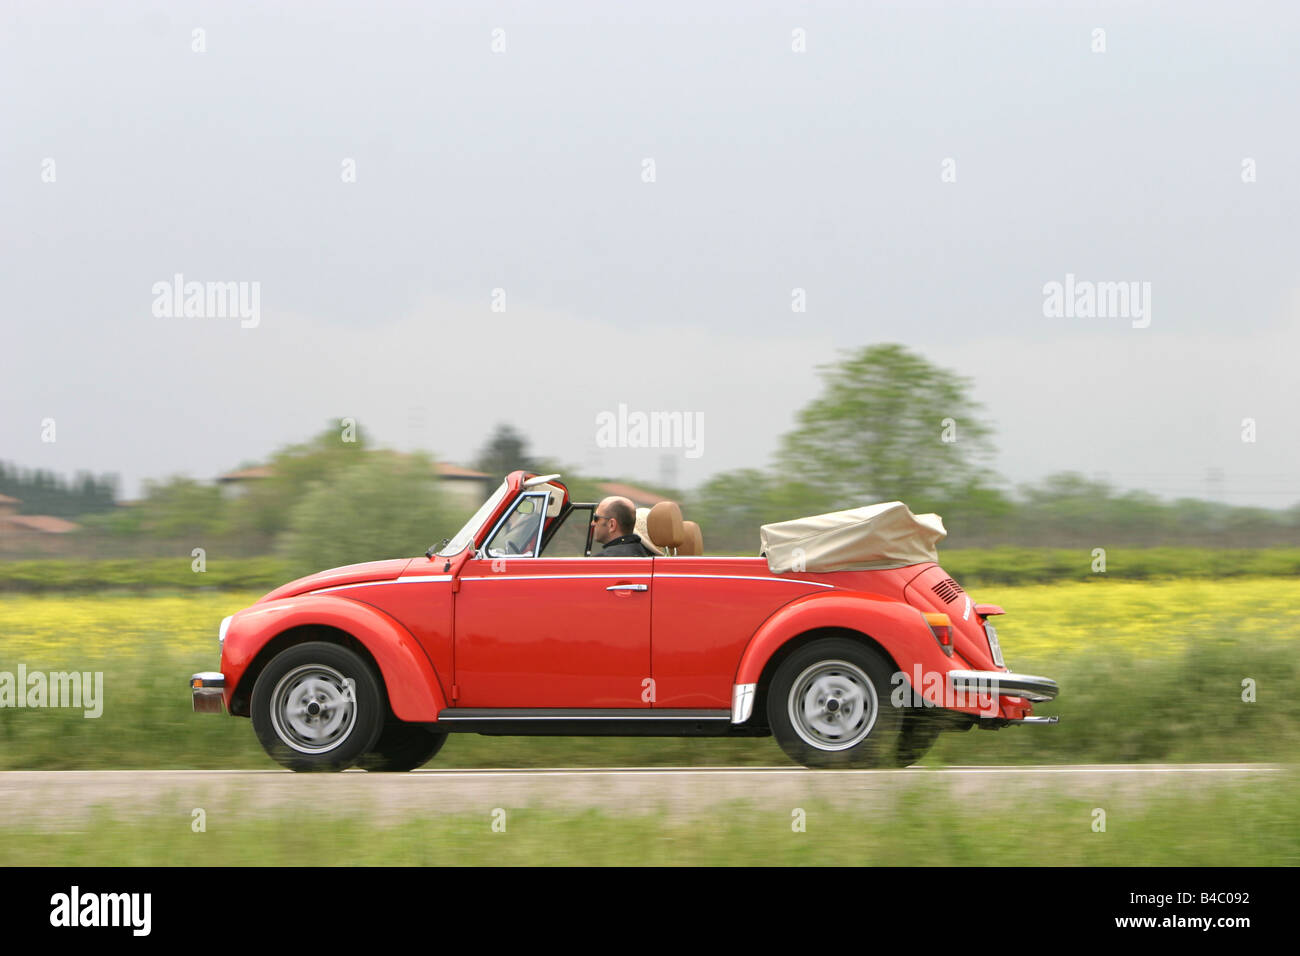 Car, VW Volkswagen Volkswagen beetle convertible, red, Vintage approx., sixties, The 70s, open top, driving, side view, country Stock Photo